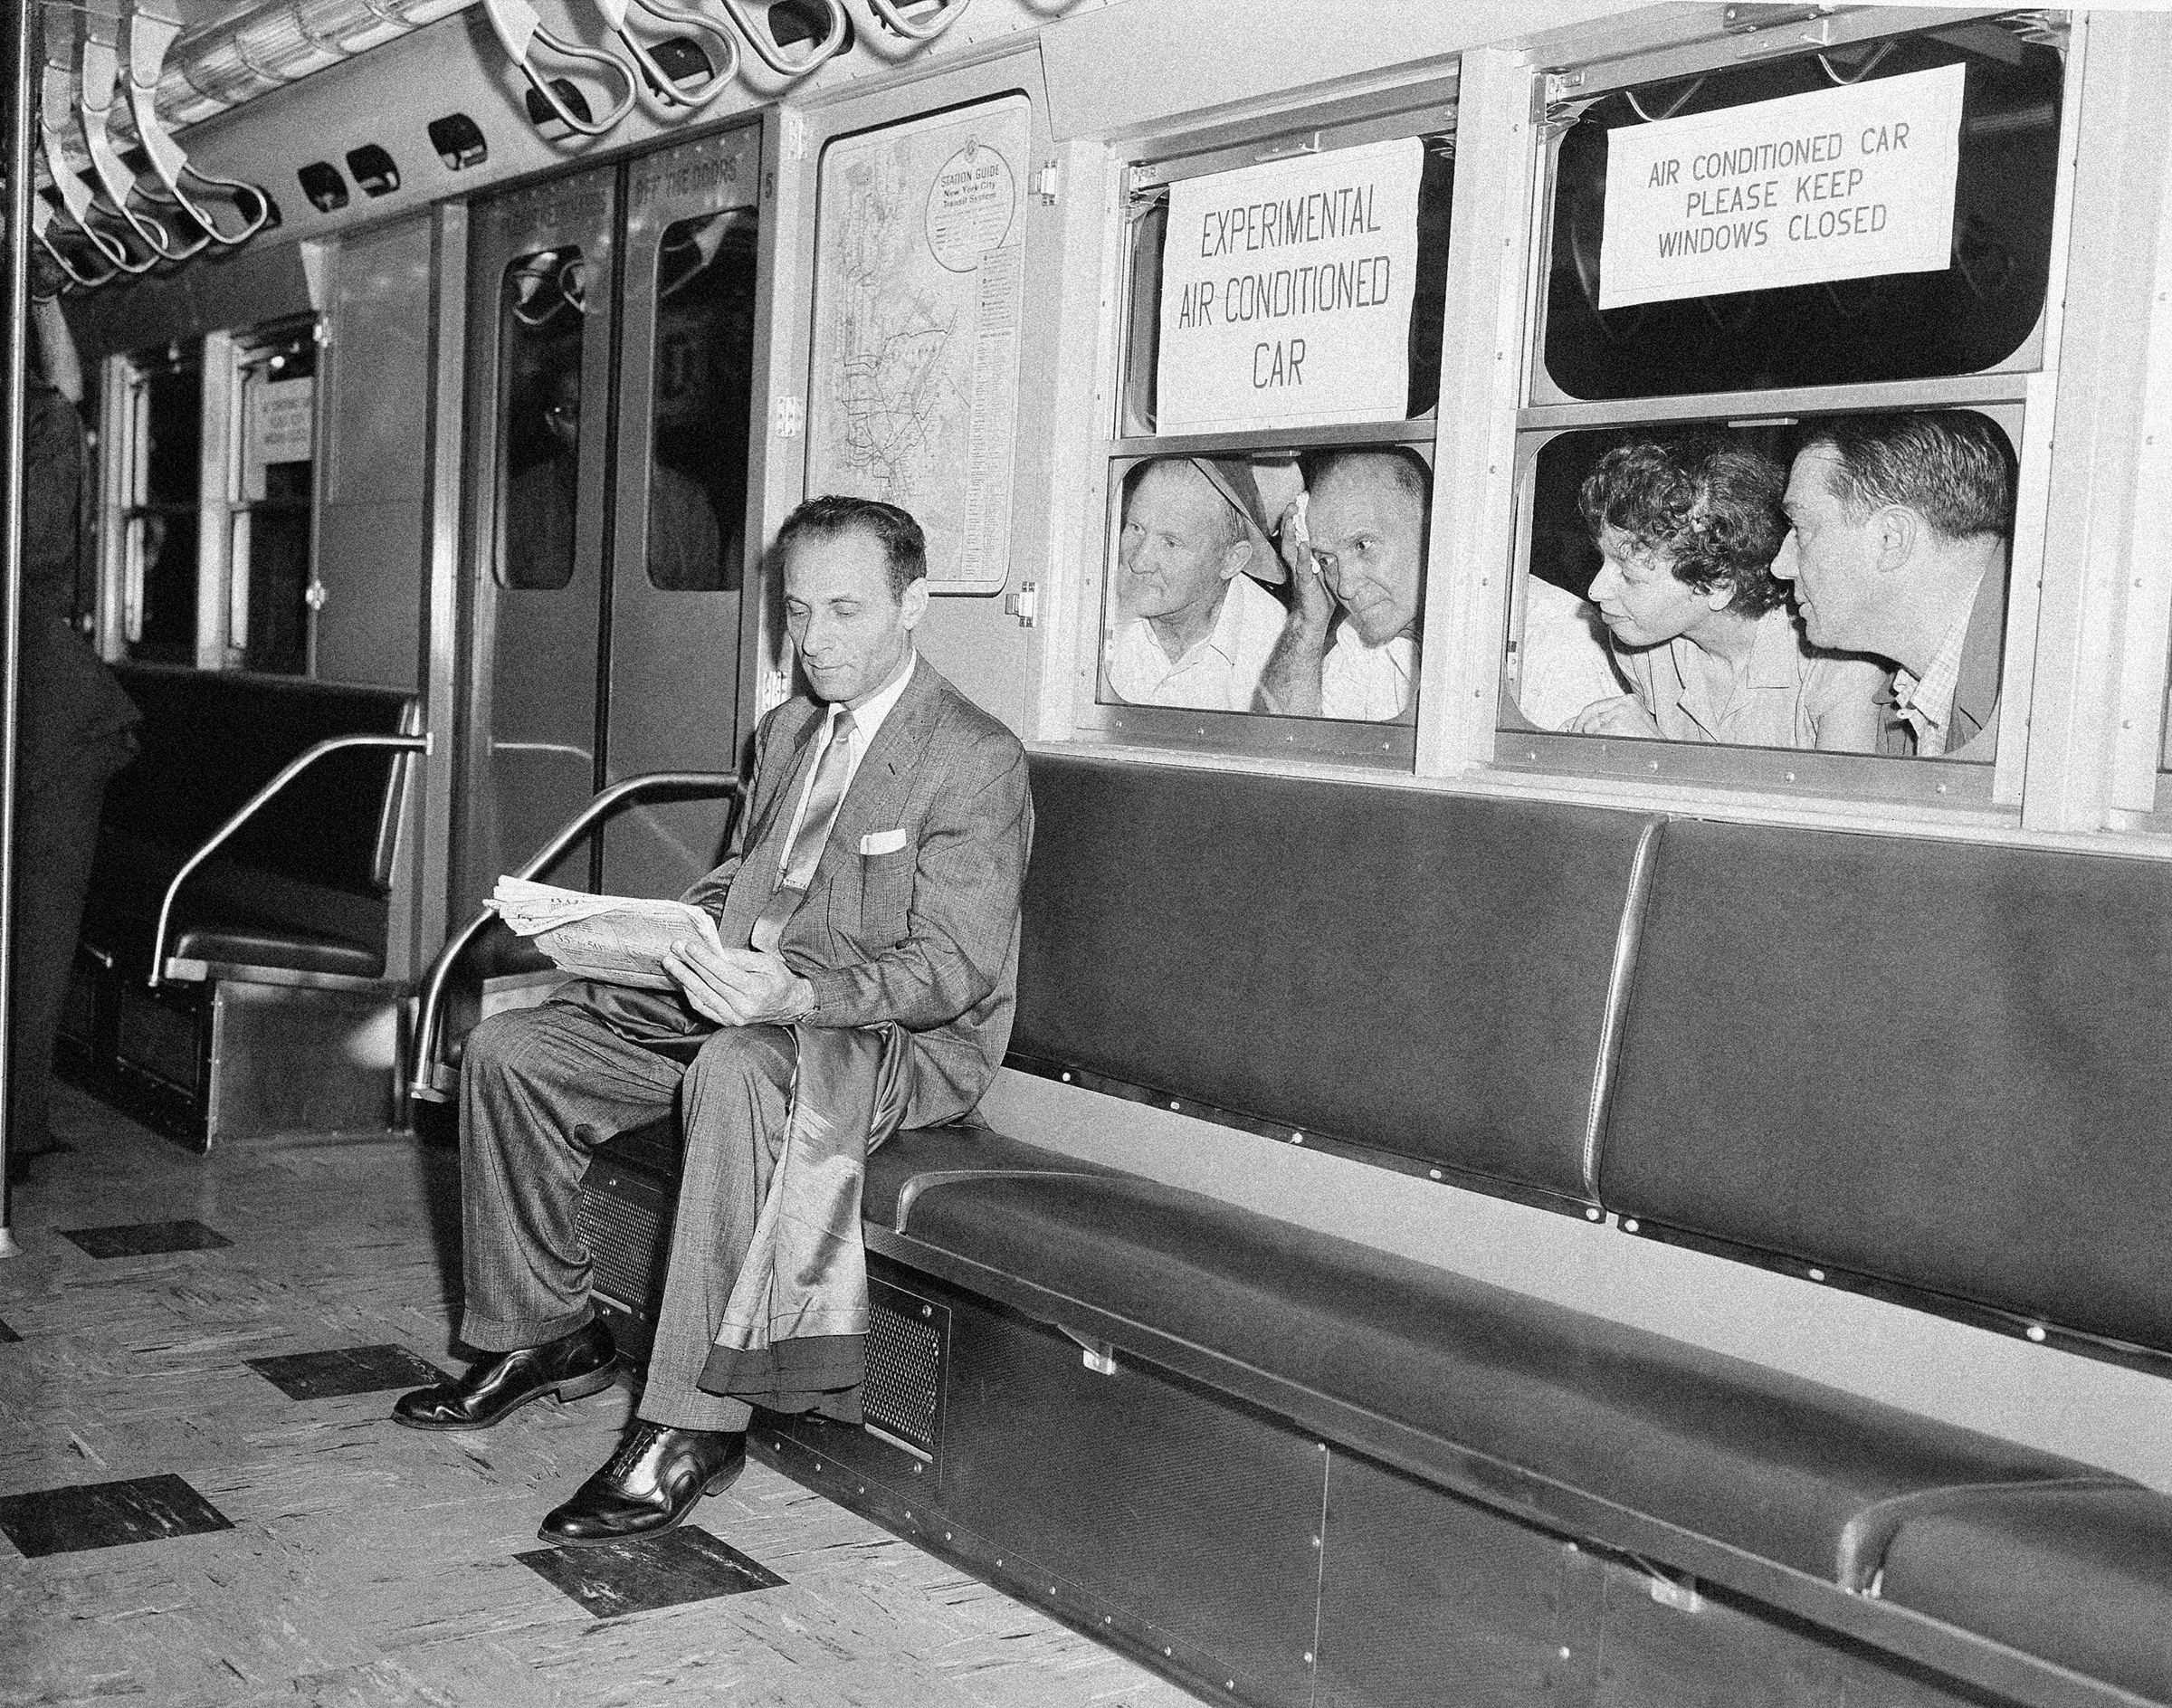 While other subway passengers perspire in the warm and humid underground station, Paul Forman appears cool and comfortable in the experimental air conditioned train, which made its first run in New York City, in July 1956. The test run included six air conditioned cars and two old cars. When the train left Grand Central Station, the temperature was 89 degrees in the old cars, while the new cars registered a temperature of 76.5 degrees.